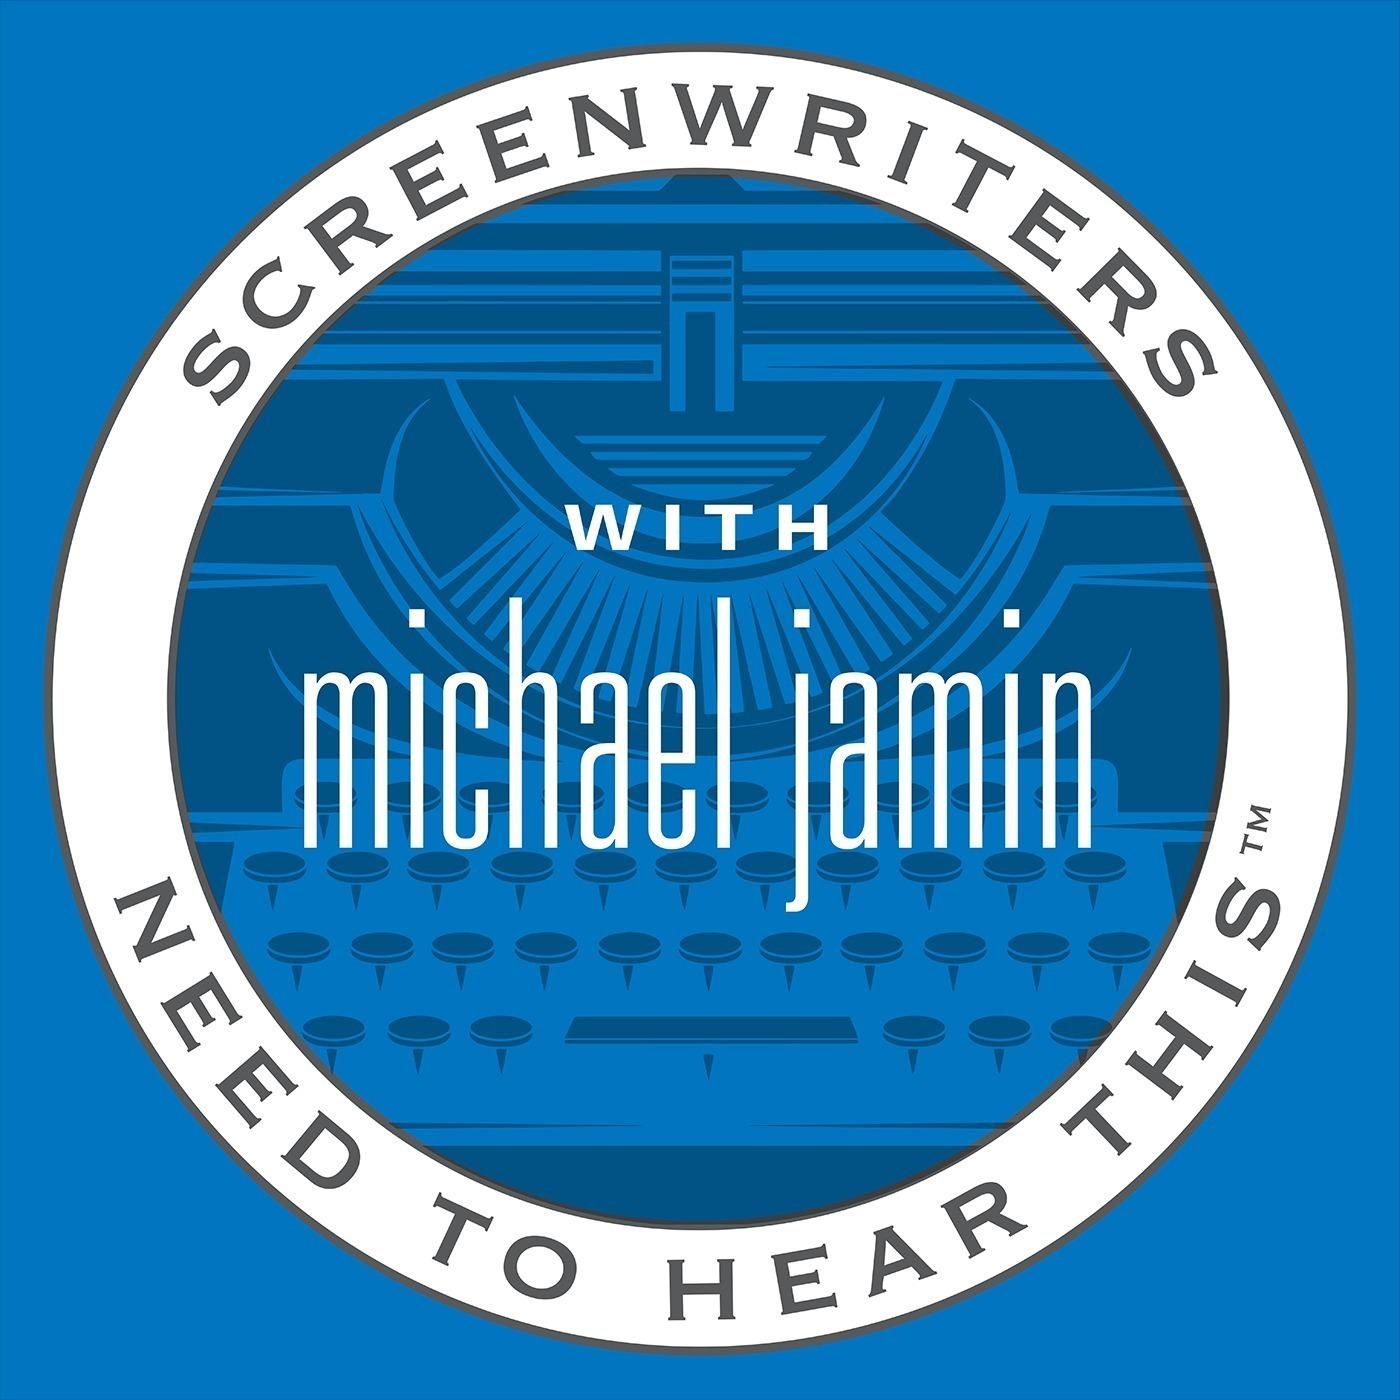 Screenwriters Need To Hear This with Michael Jamin